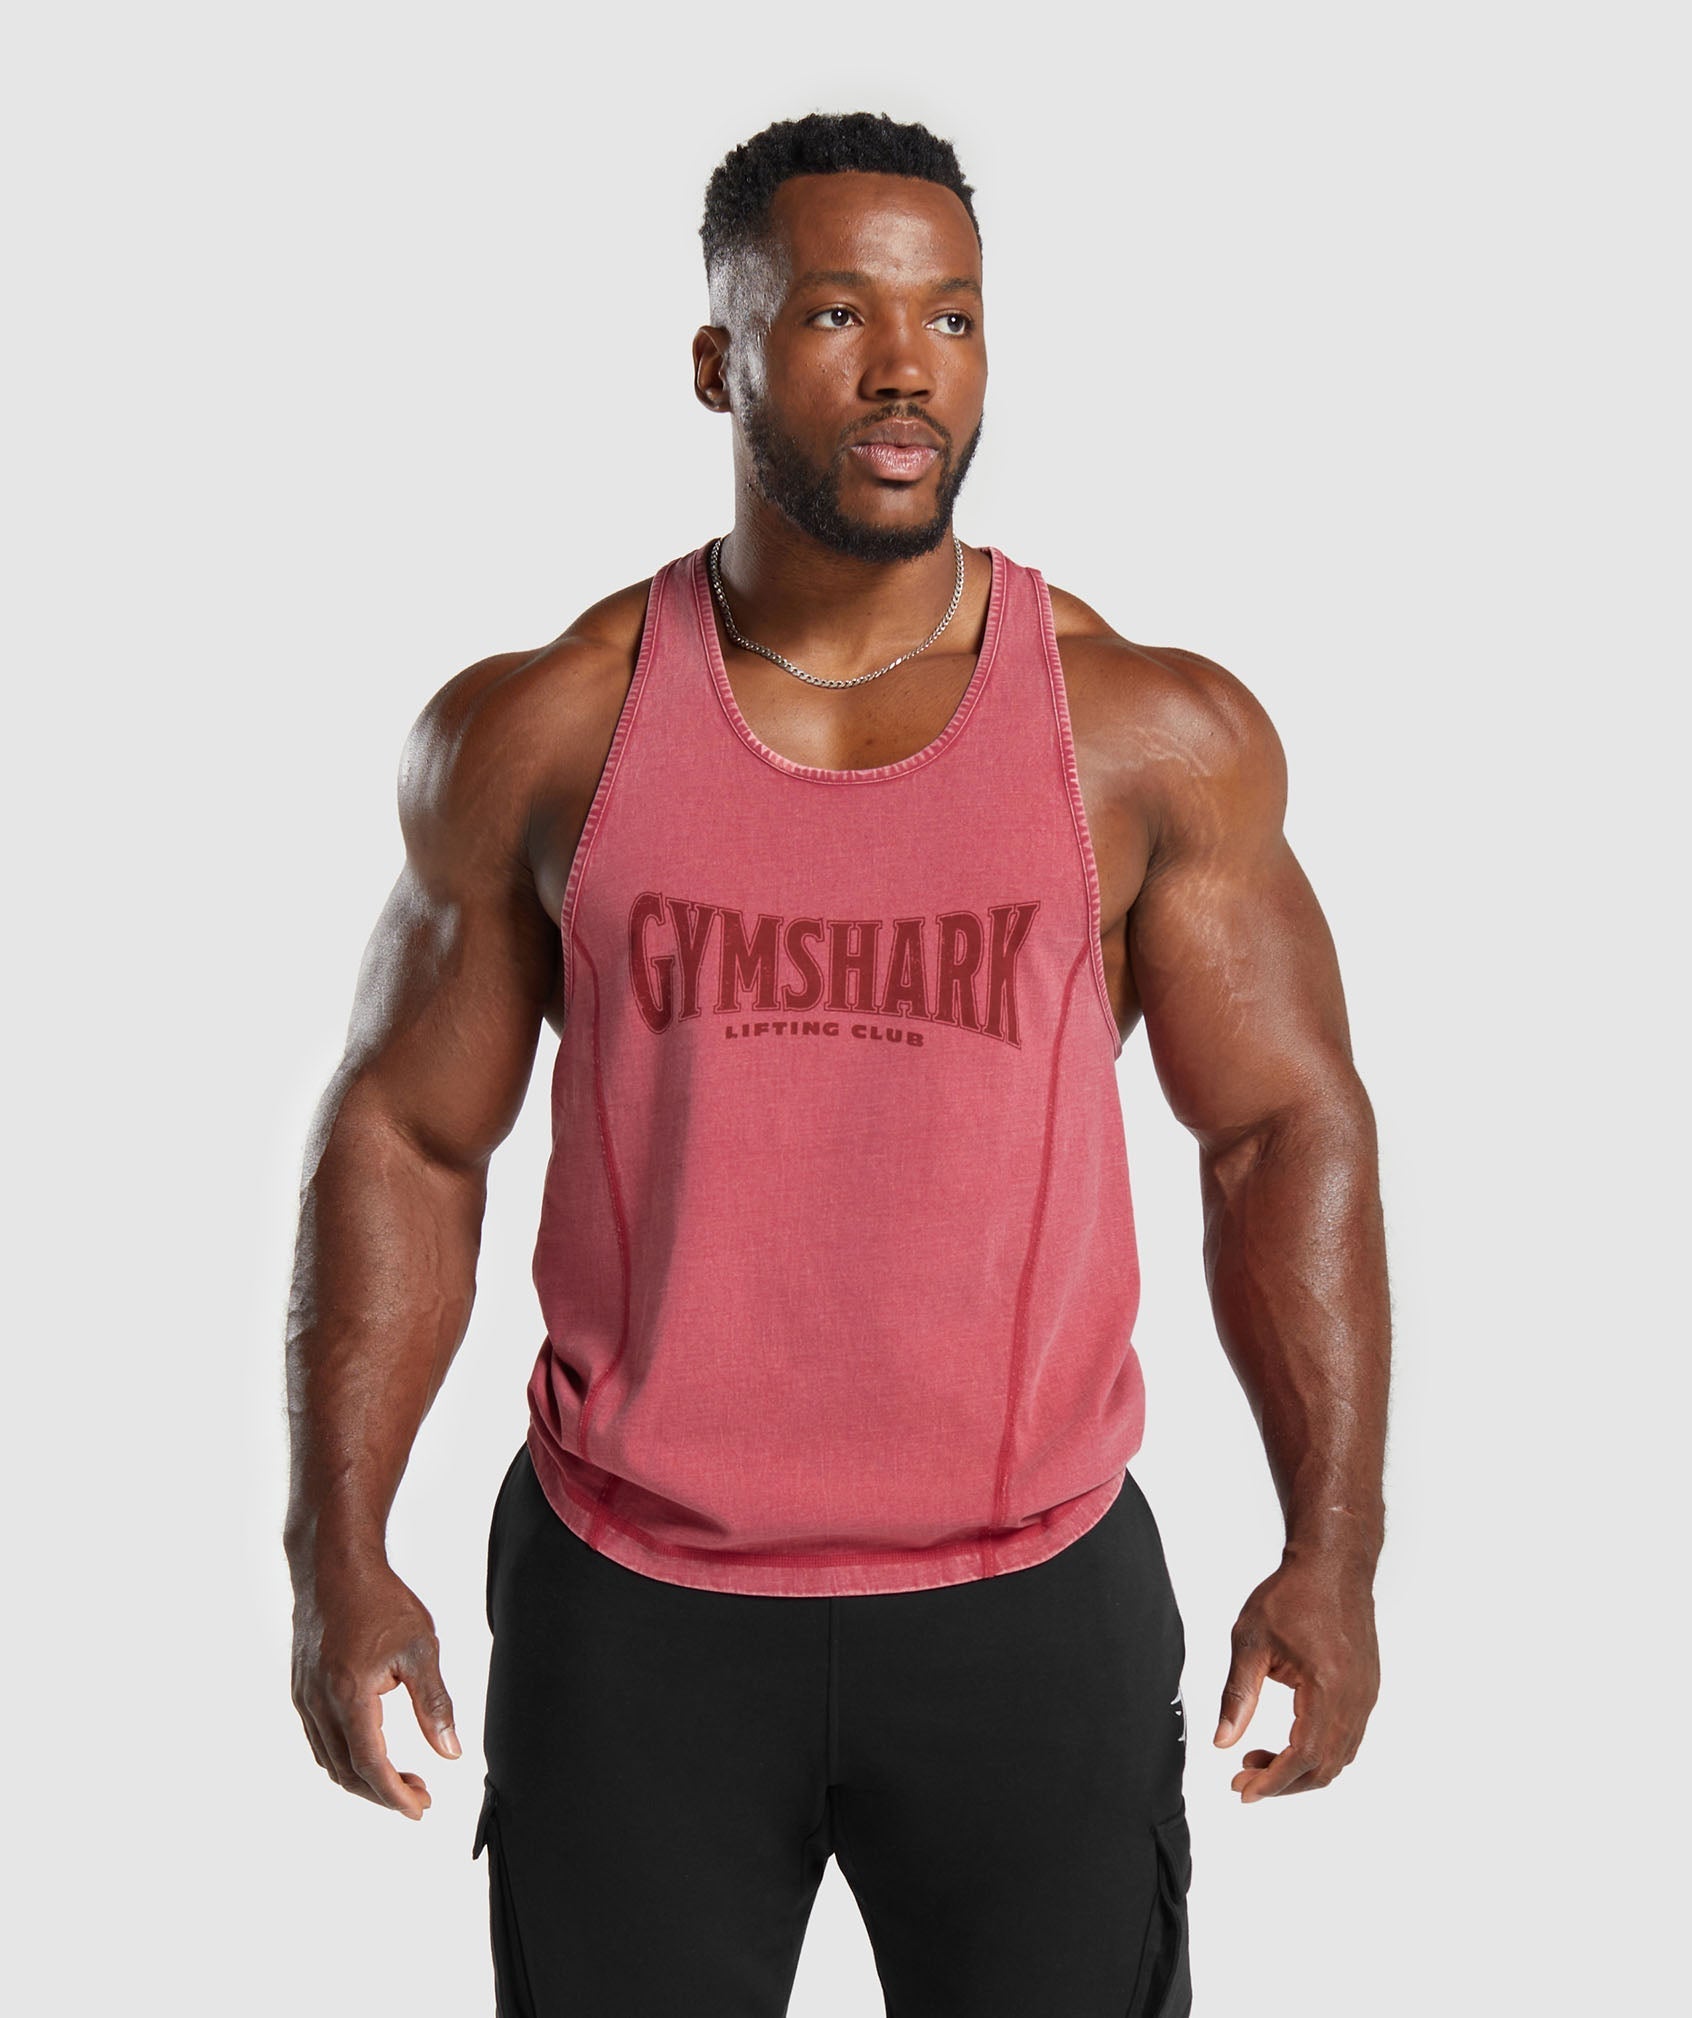 The Legacy Stringer. Wear and build your Legacy with pride. #Gymshark #Gym  #Sweat #Train #Perform #Seamless #Exercise …